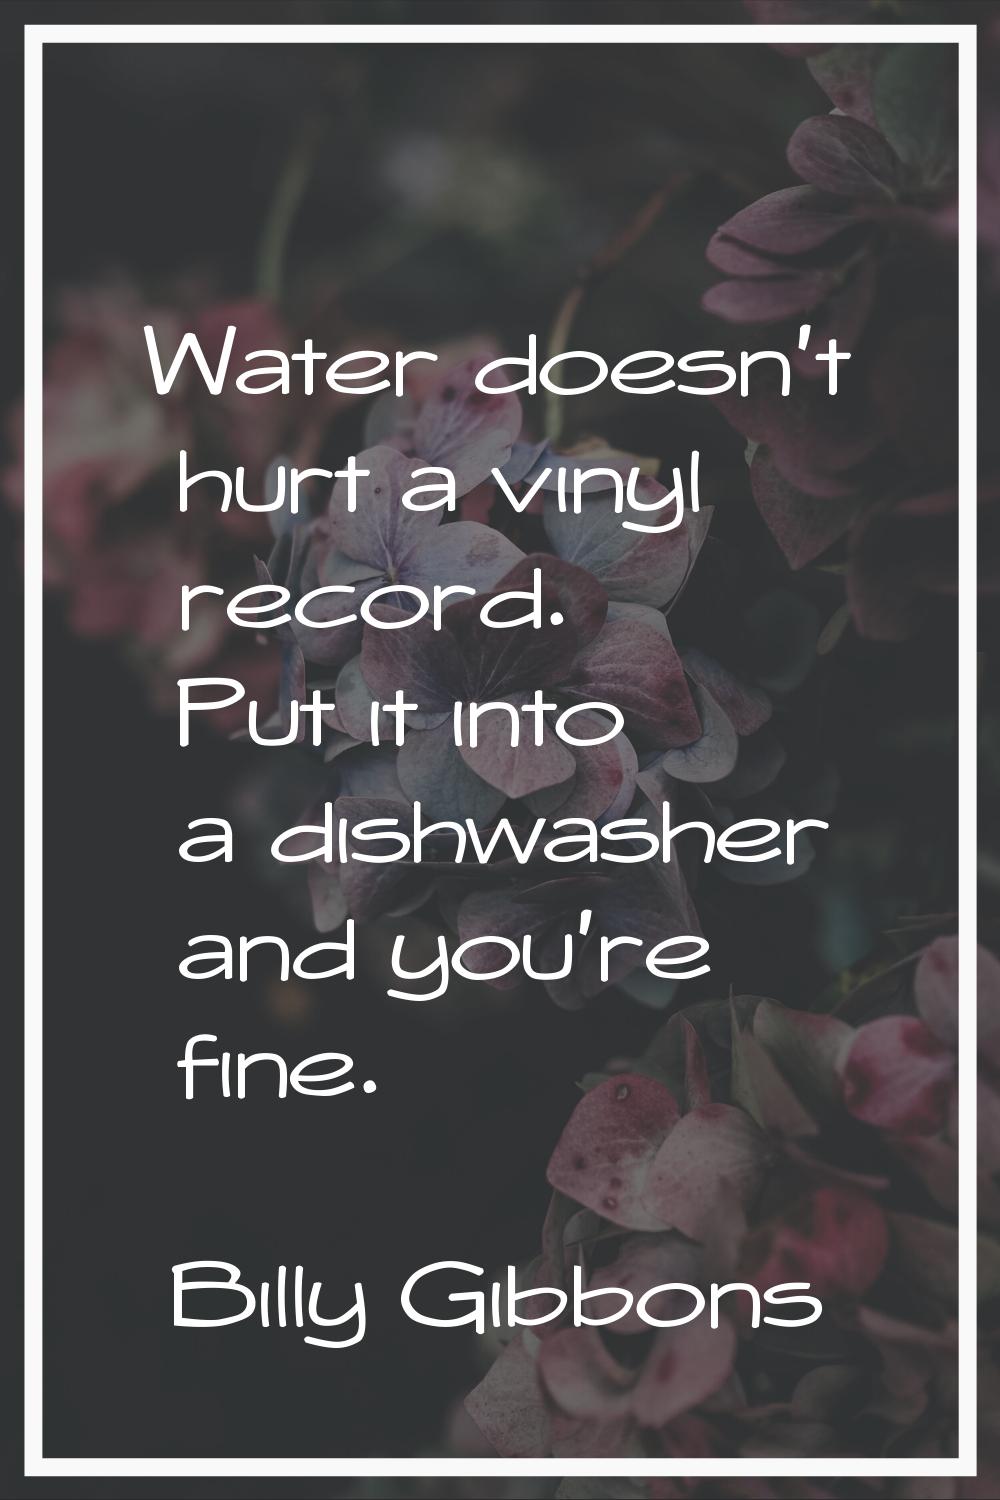 Water doesn't hurt a vinyl record. Put it into a dishwasher and you're fine.